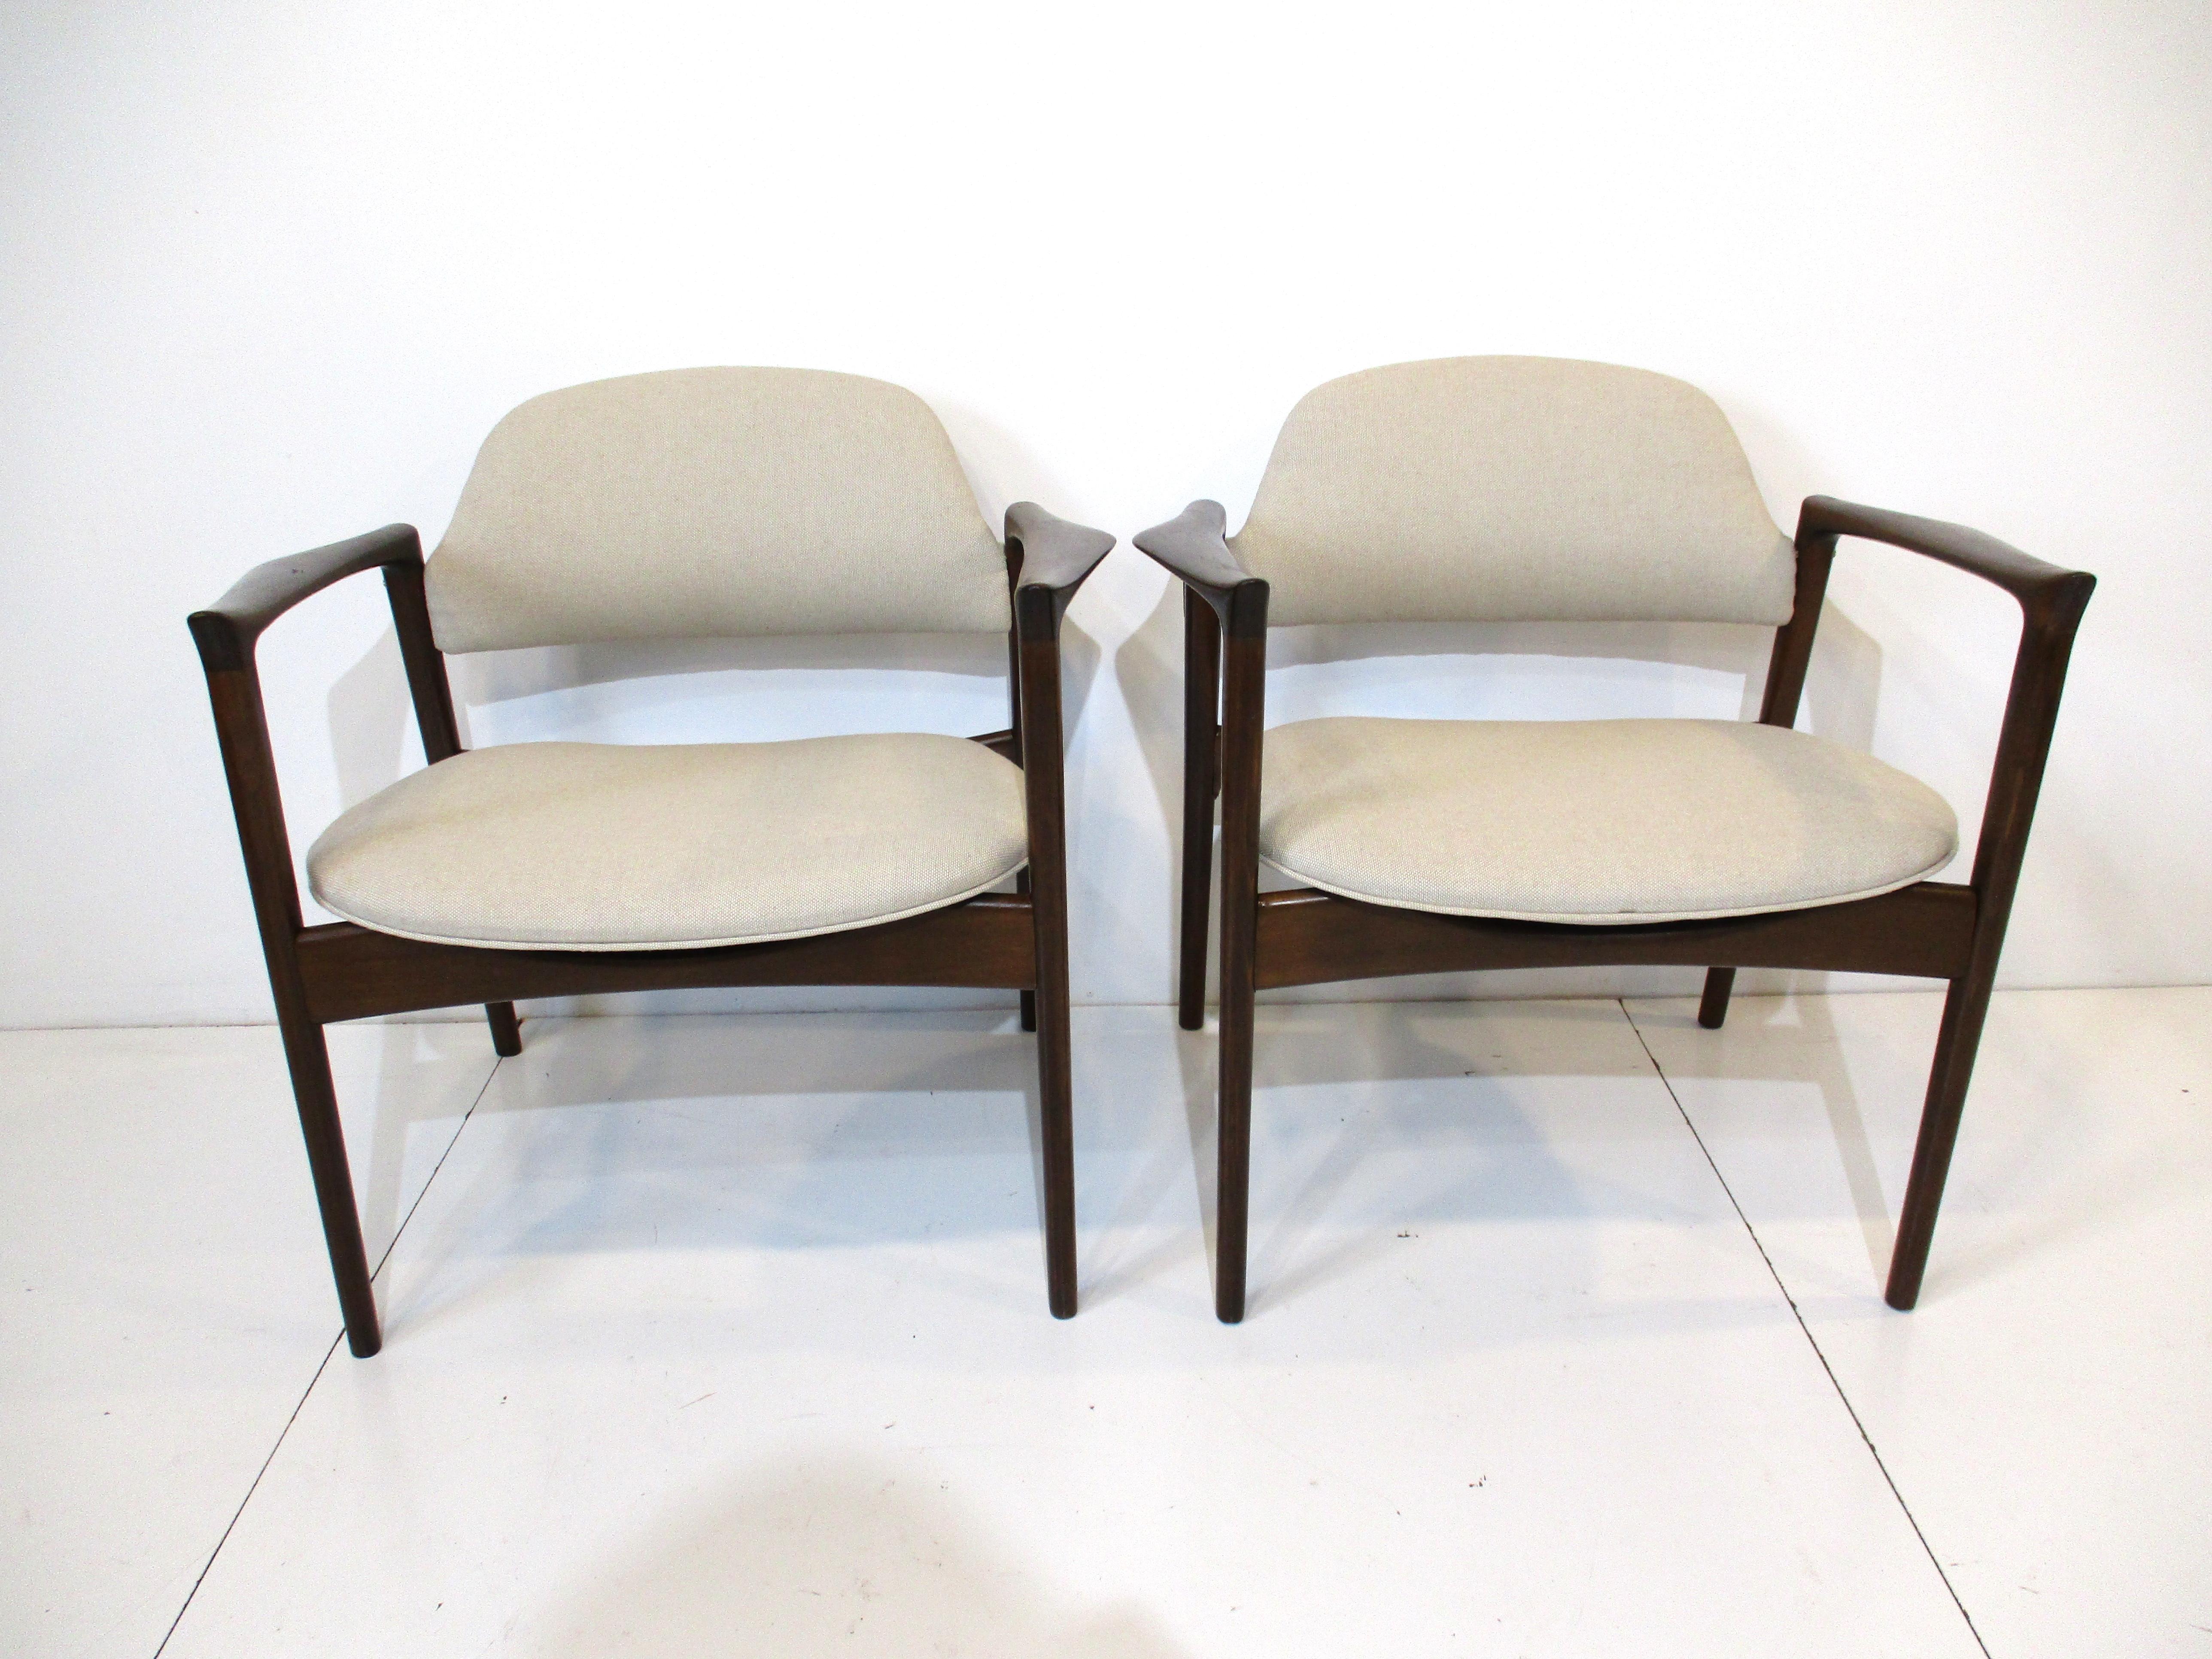 A pair of rare Ib Kofod Larsen writing lounge chairs with sculptural winged arms and very well crafted frames. Finished in a medium dark ebony with brass hardware and upholstered in a sand toned tightly woven linen blended fabric typical of Danish